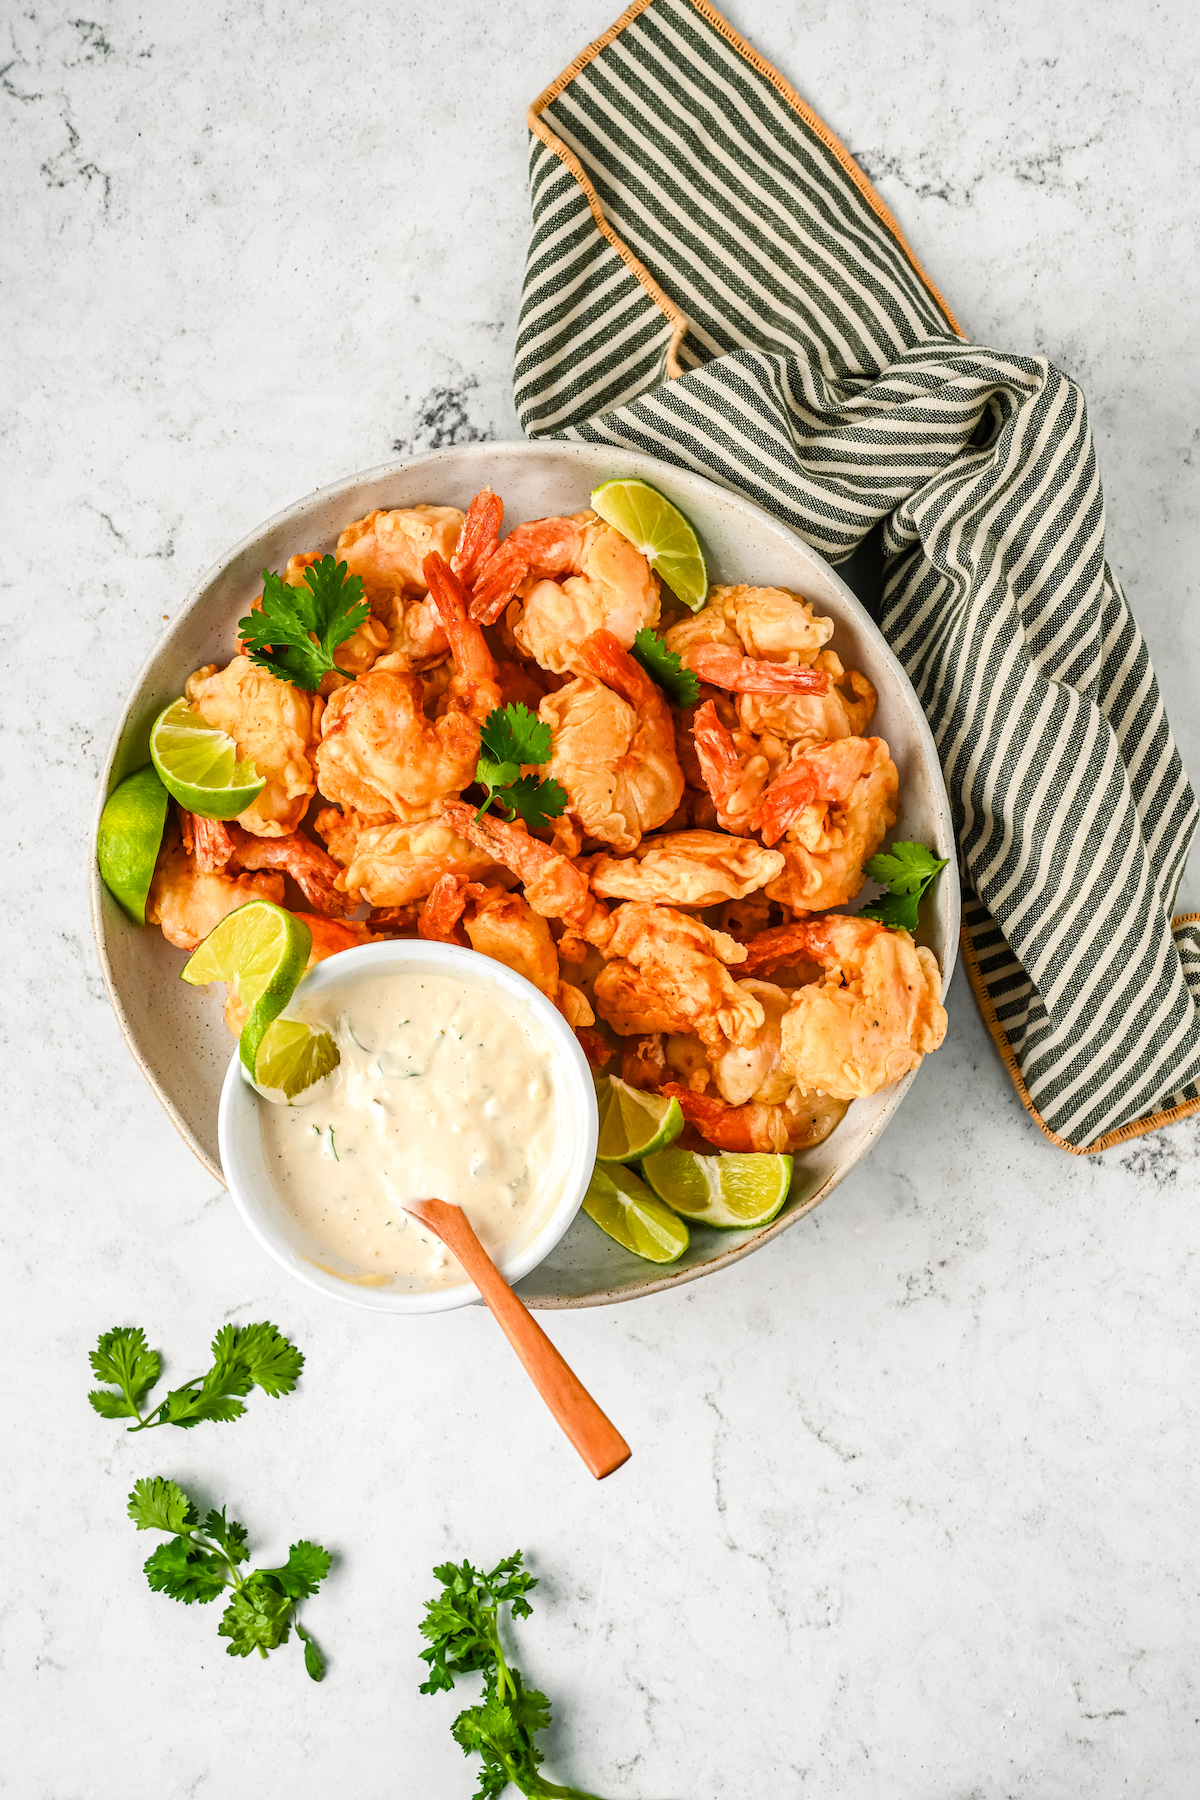 Mexican fried shrimp with creamy dipping sauce on the side.